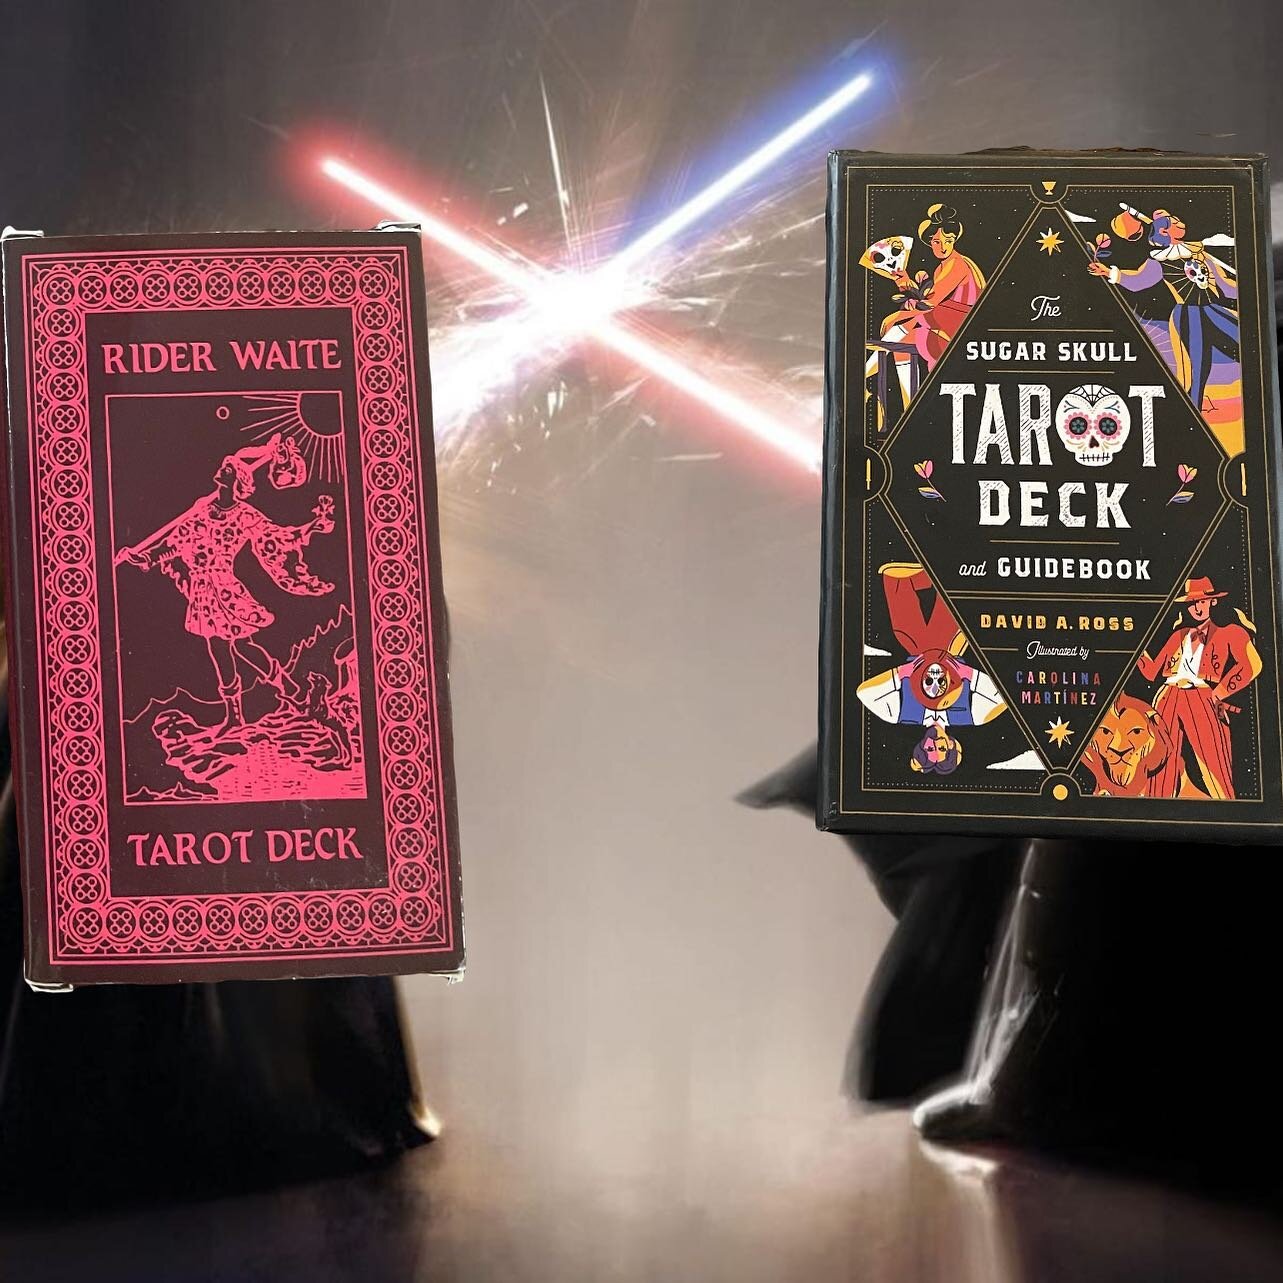 Pink &amp; Black Rider Waite Tarot vs. the Sugar Skull Tarot! Who will go on to the next round of March madness? #marchmadness